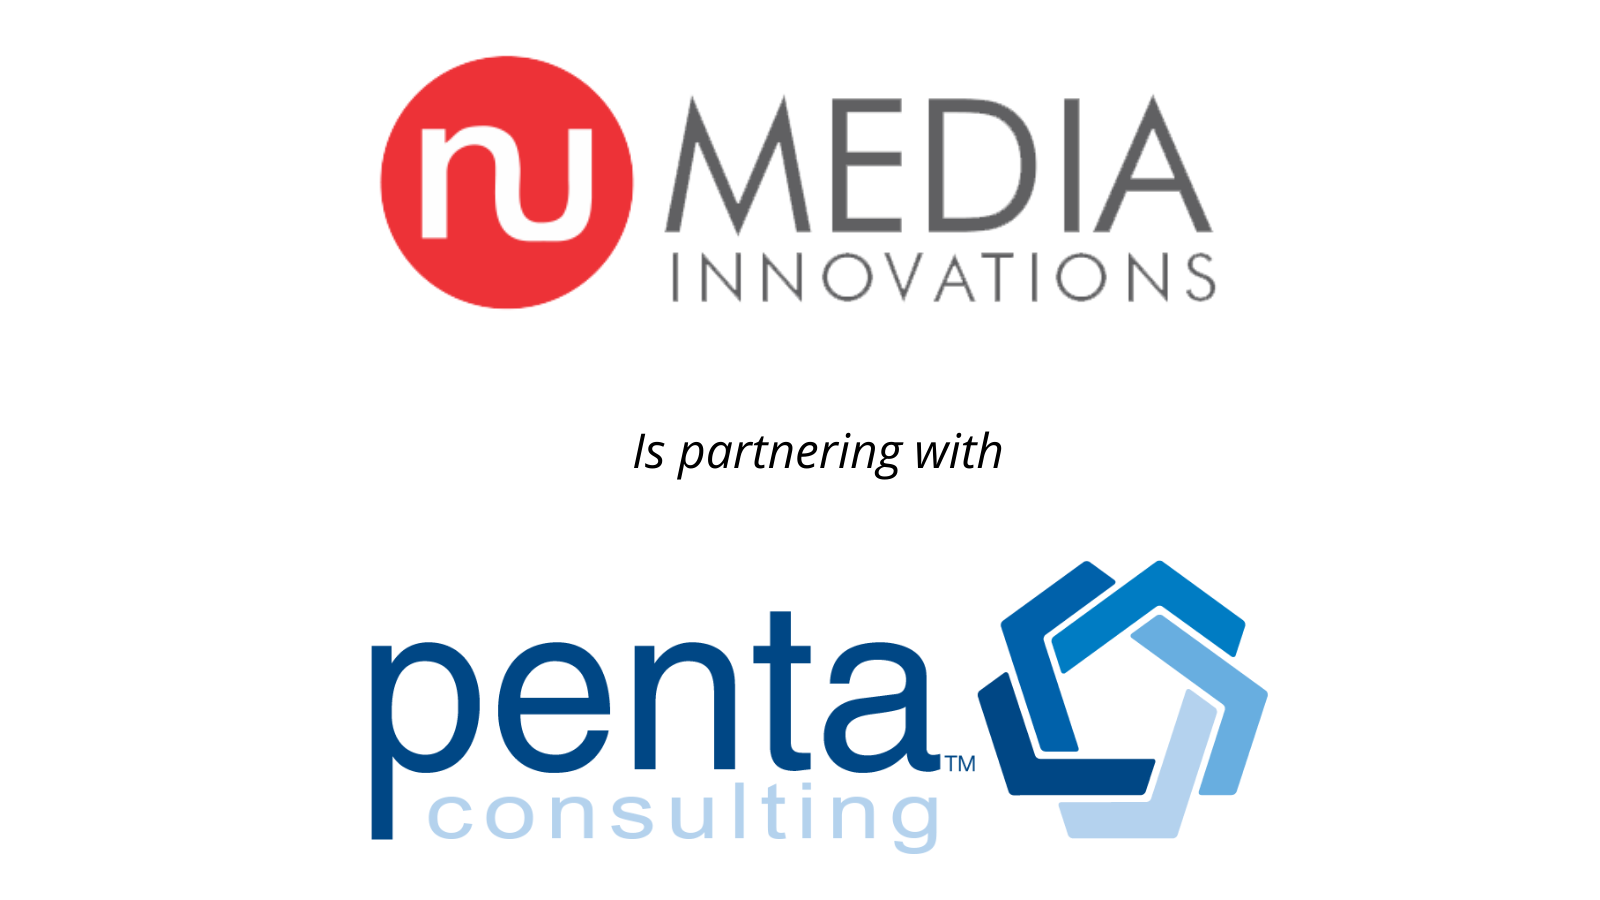 nuMedia partners with Penta Consulting